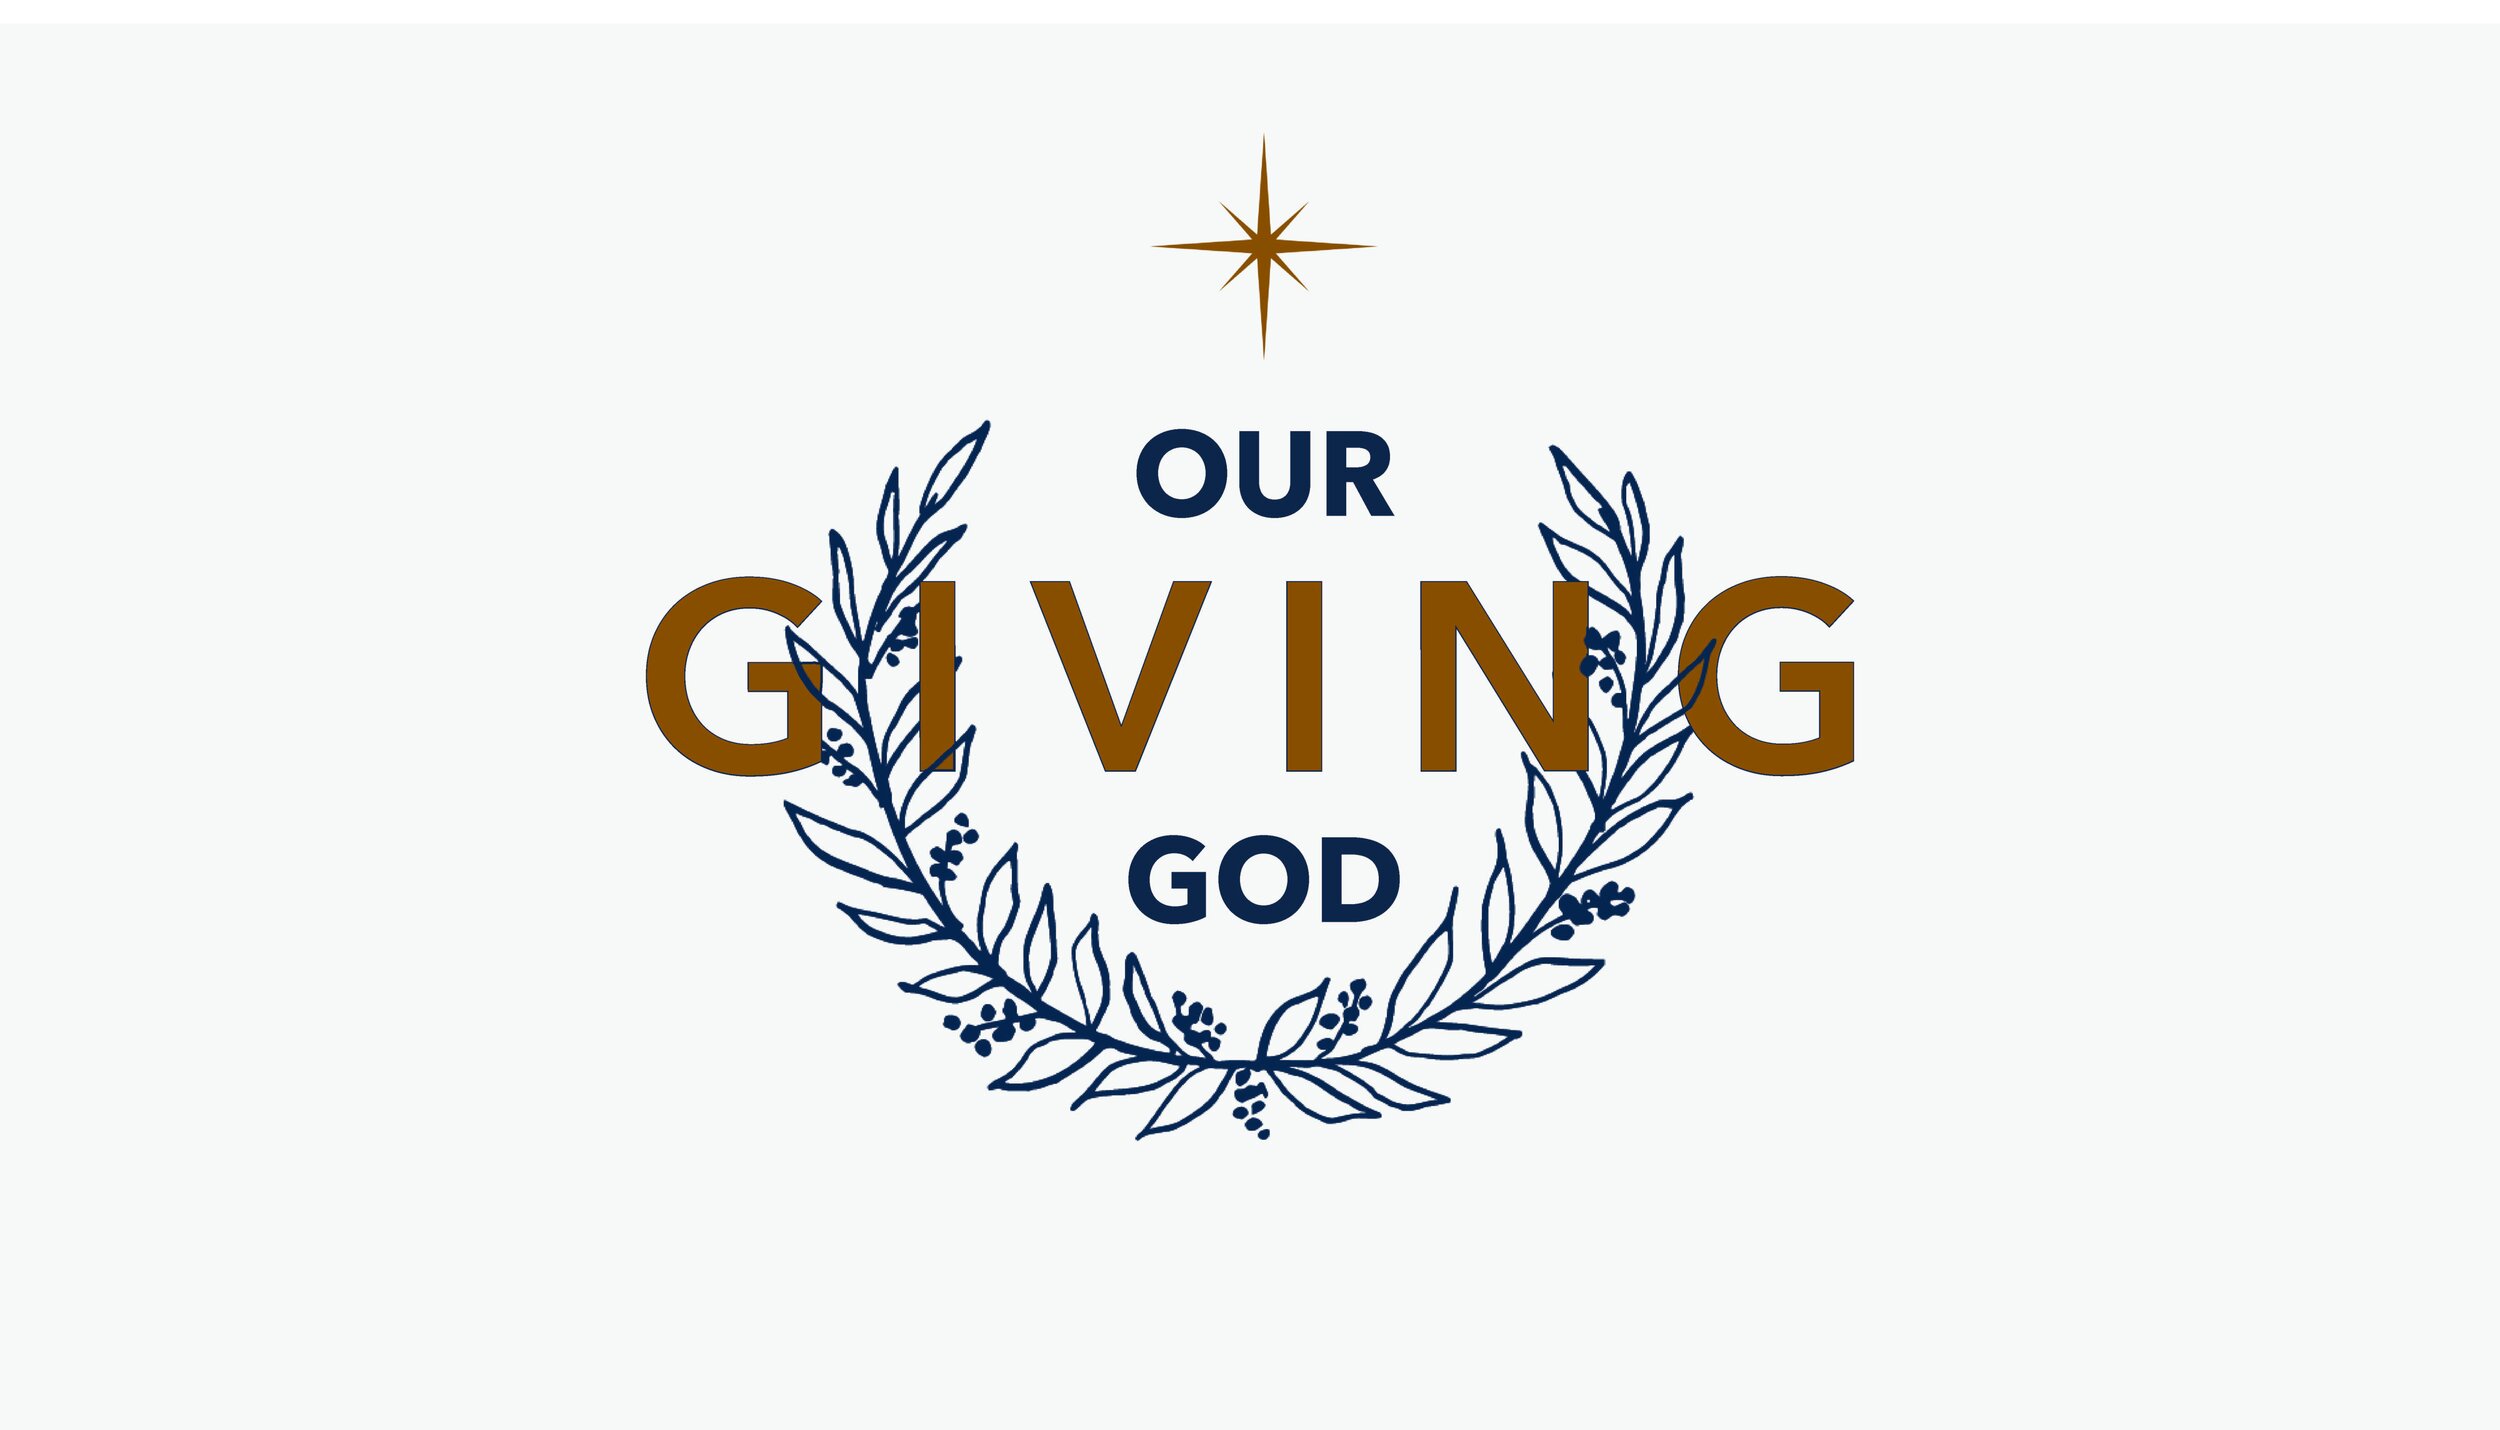 Series: Our Giving God